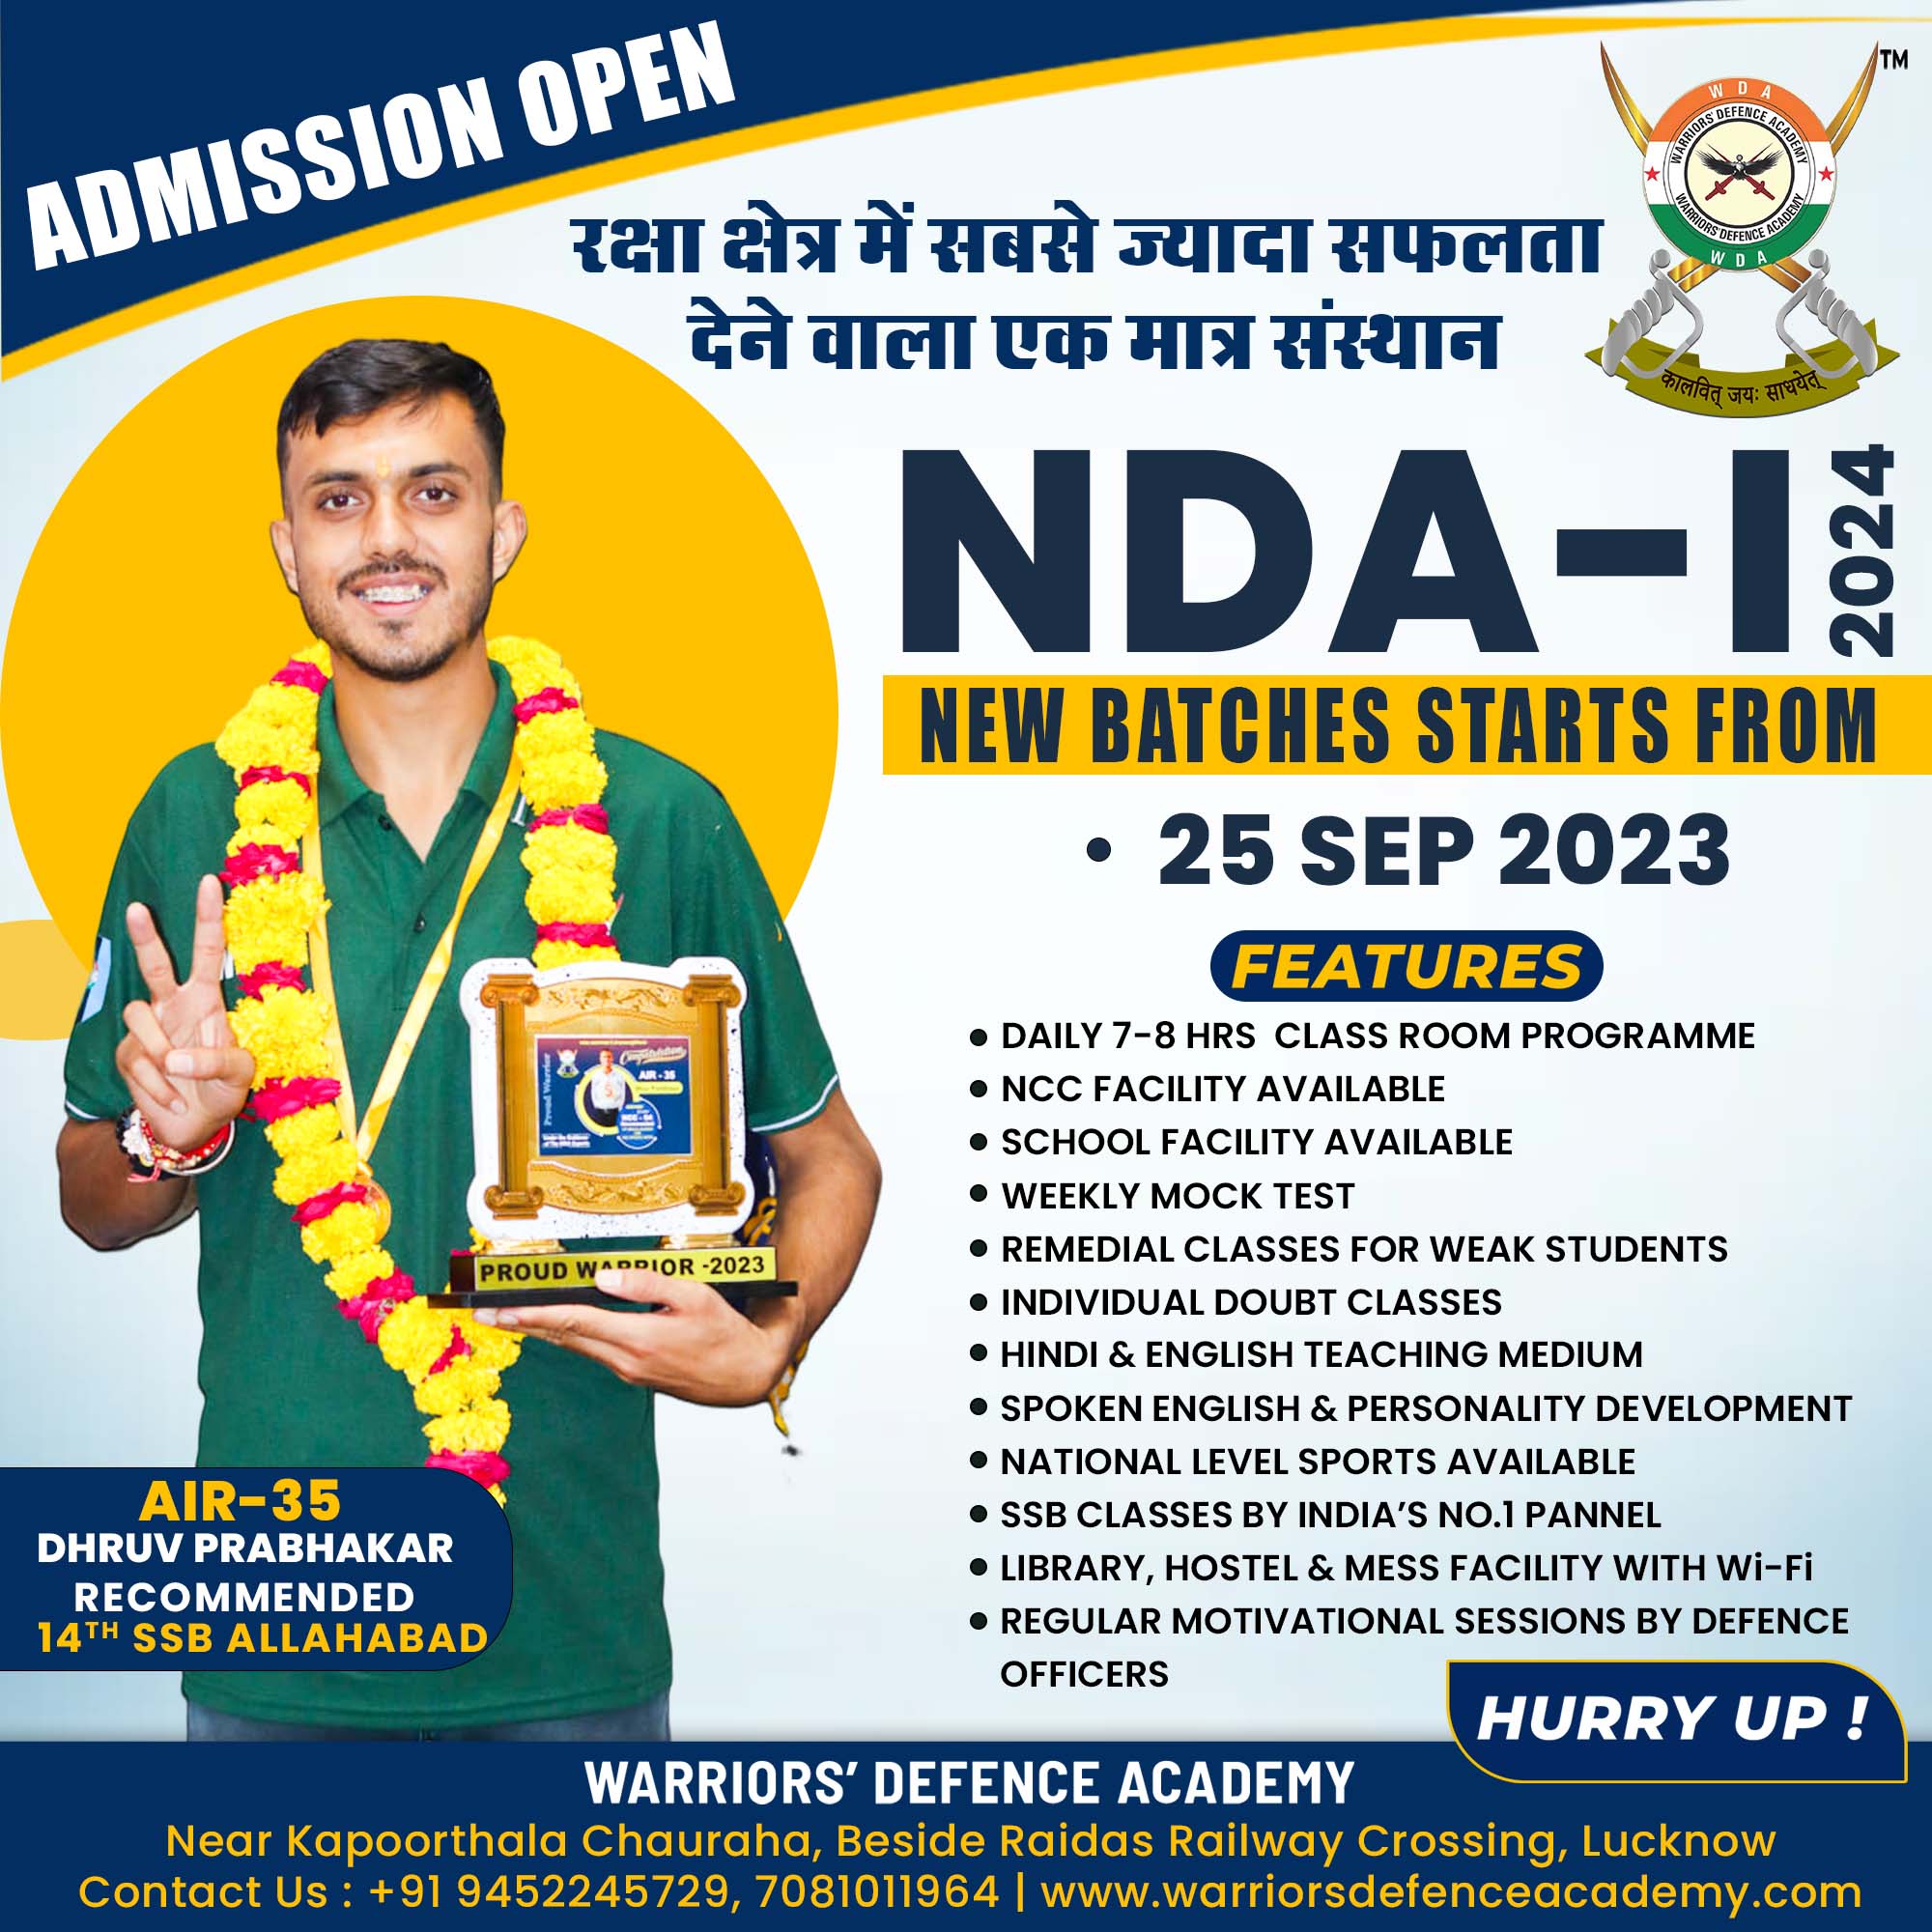 Top NDA Institute in Lucknow | Best Defence Coaching in Lucknow | Warriors Defence Academy | Best NDA Coaching in Lucknow